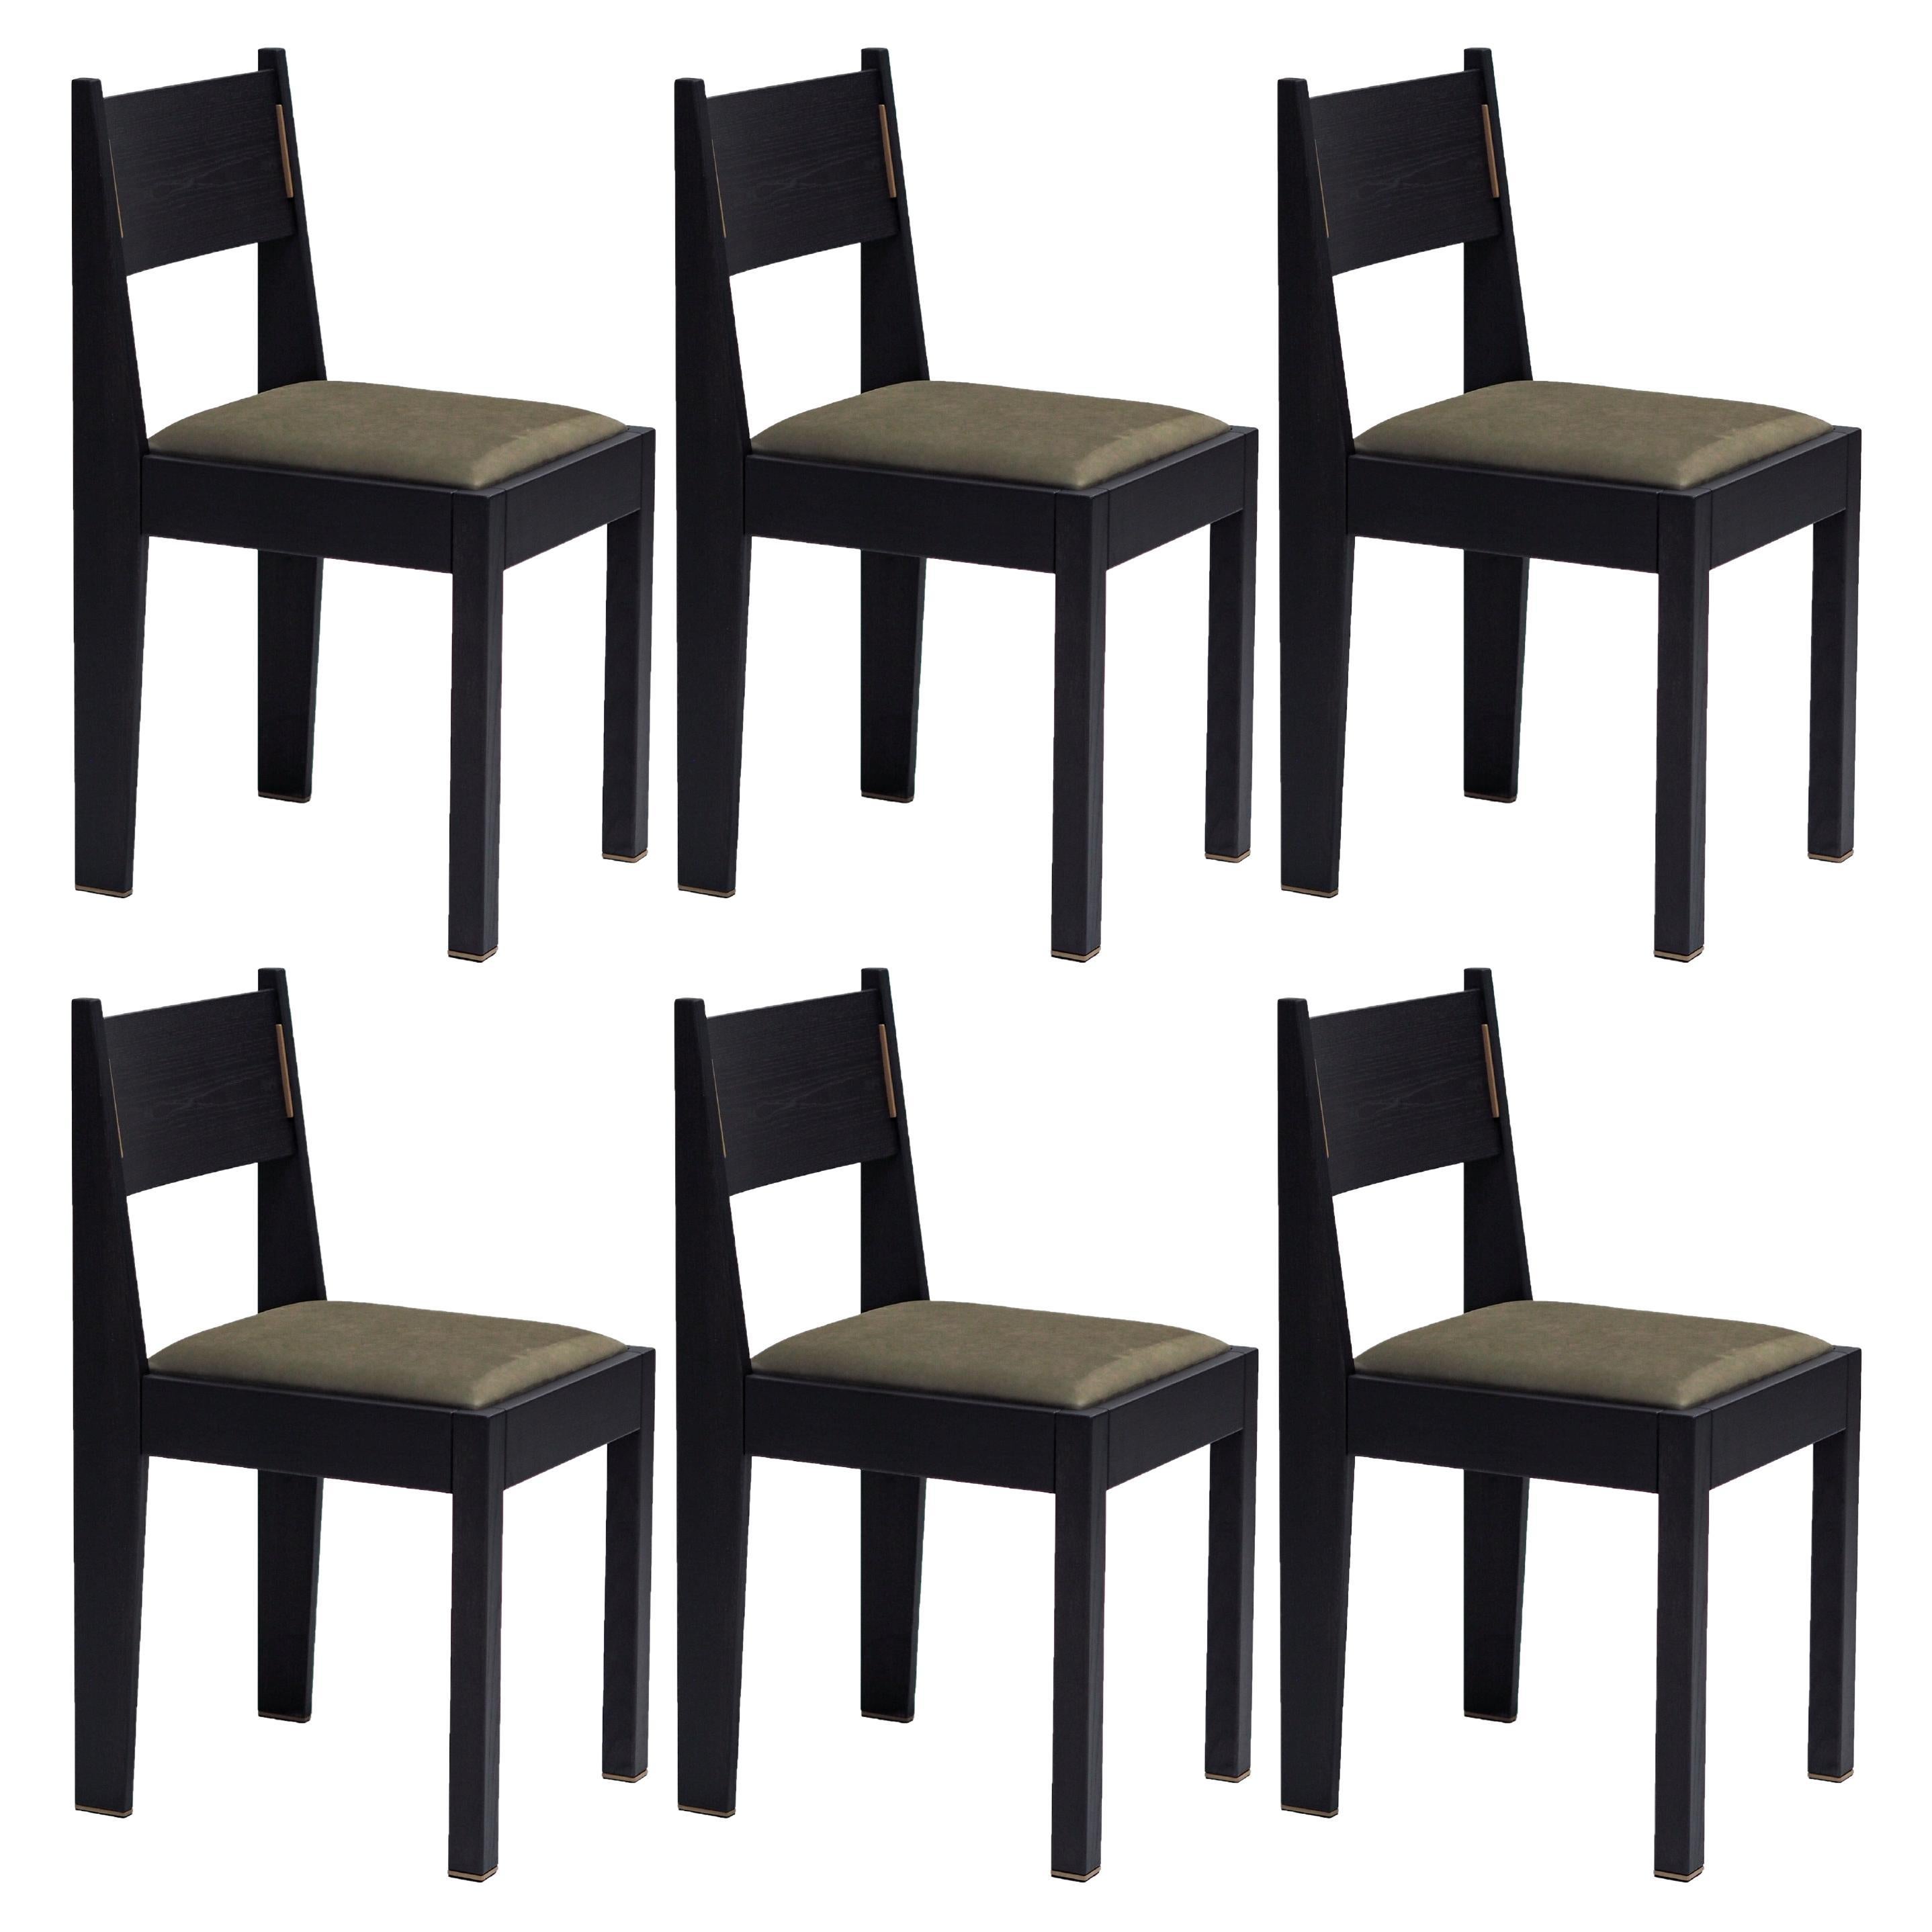 Set of 6 Art Deco Chair, Black Ash Wood, Leather Upholstery & Brass Details